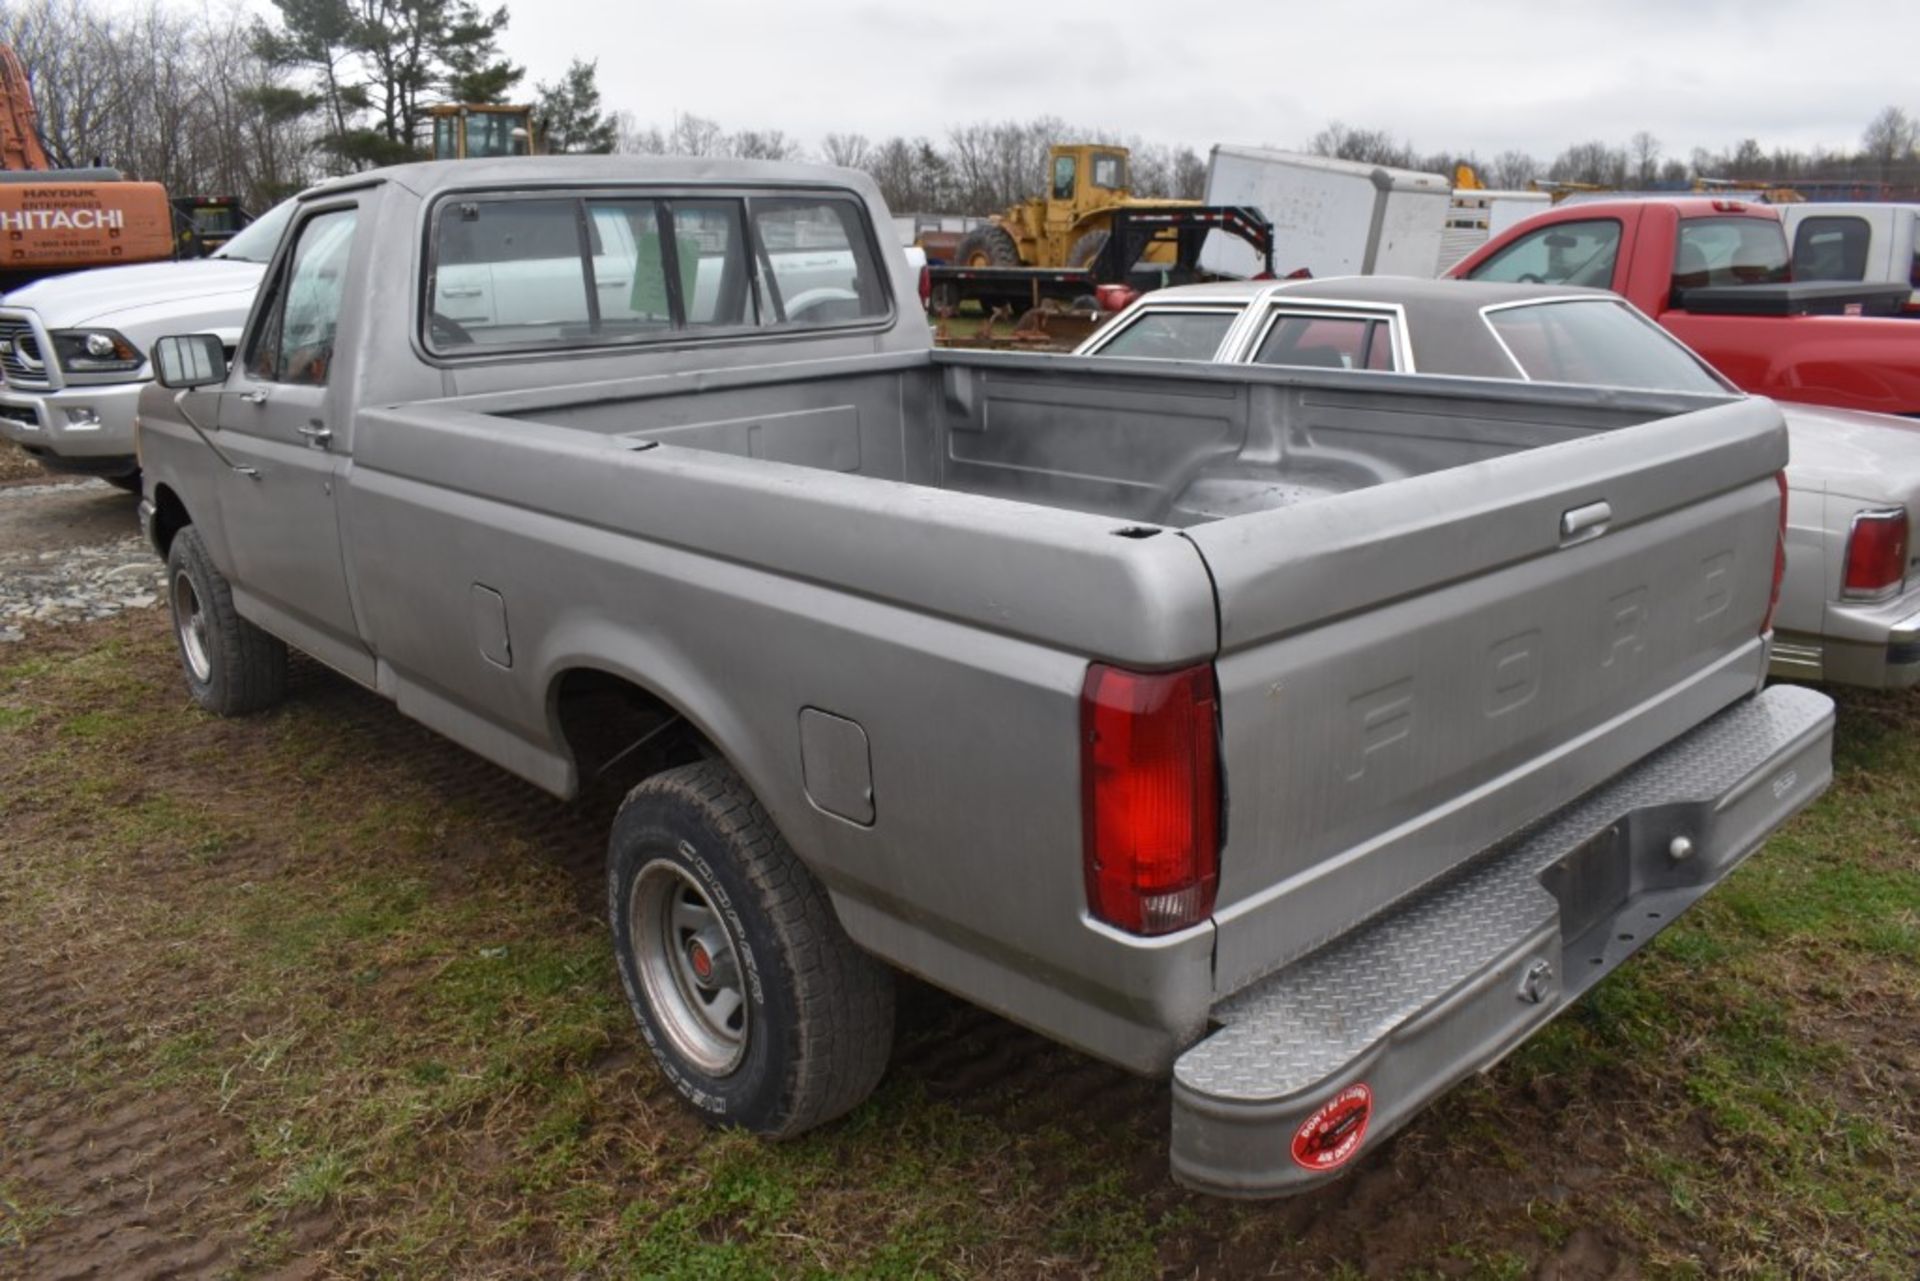 1987 Ford F-150 Truck - Image 8 of 36